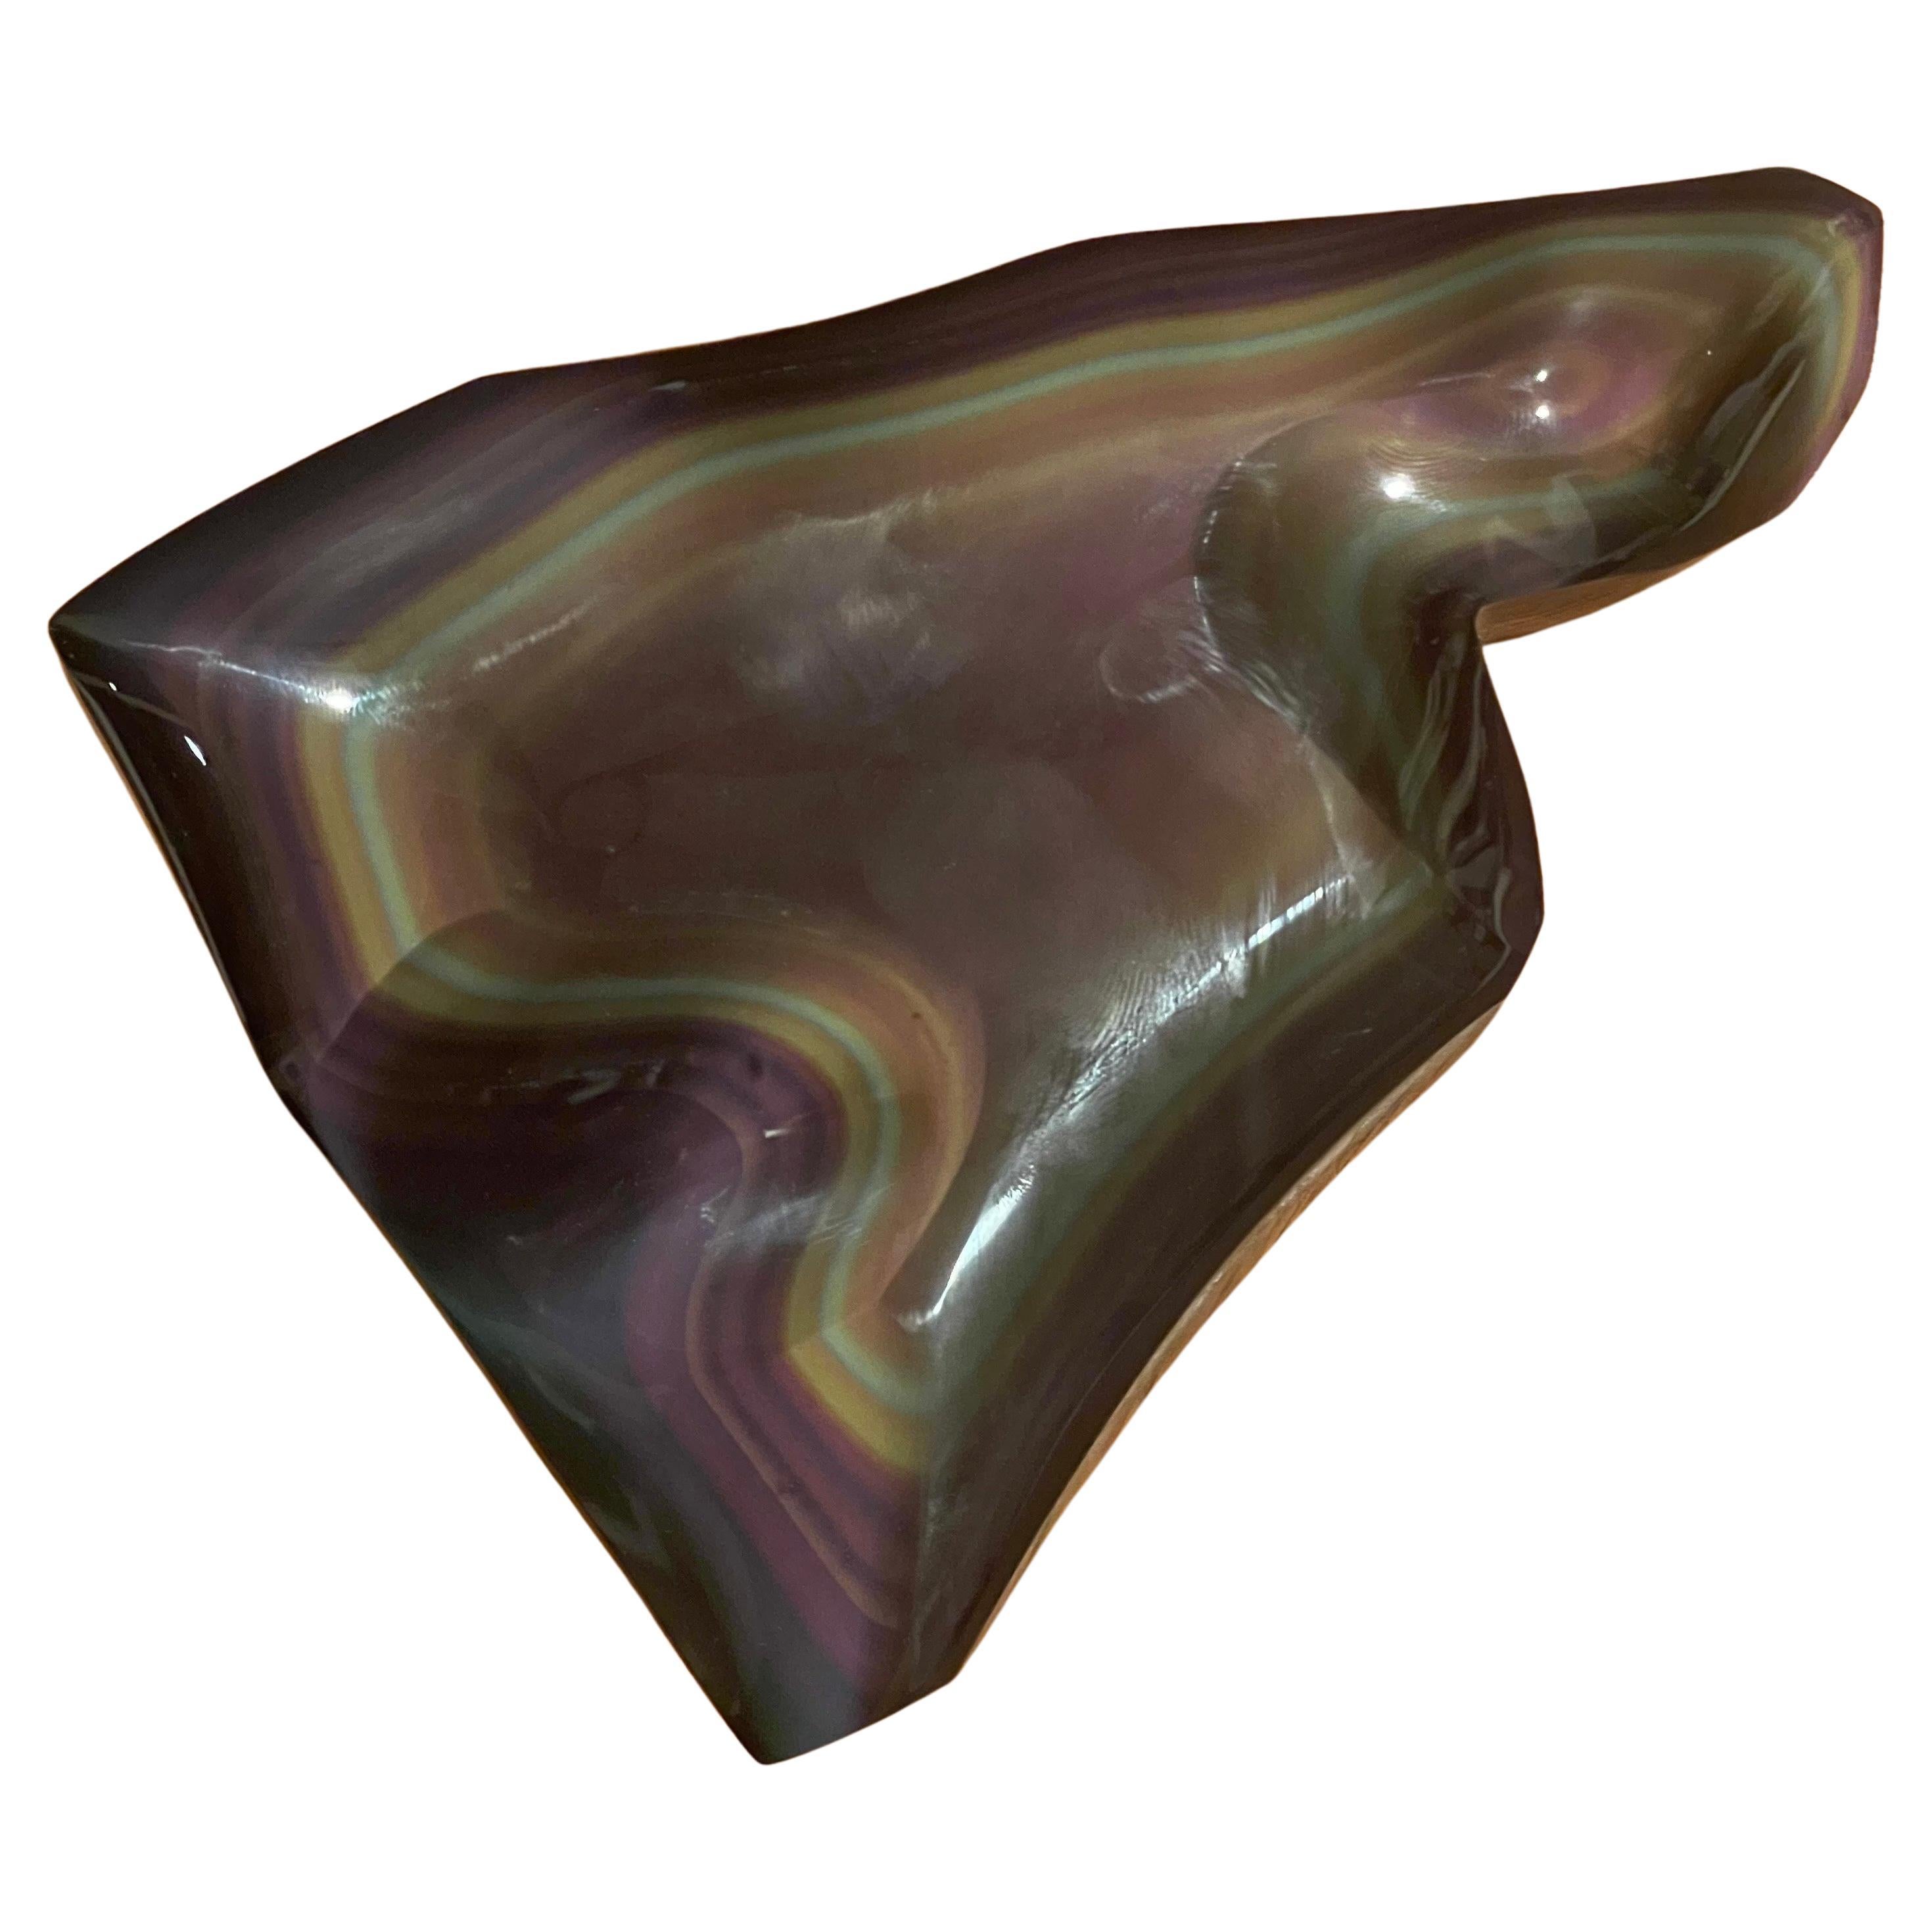 A gorgeous highly polished rainbow obsidian paperweight, circa 1960s. The piece is in very good condition with wonderful colors and measures 6.25